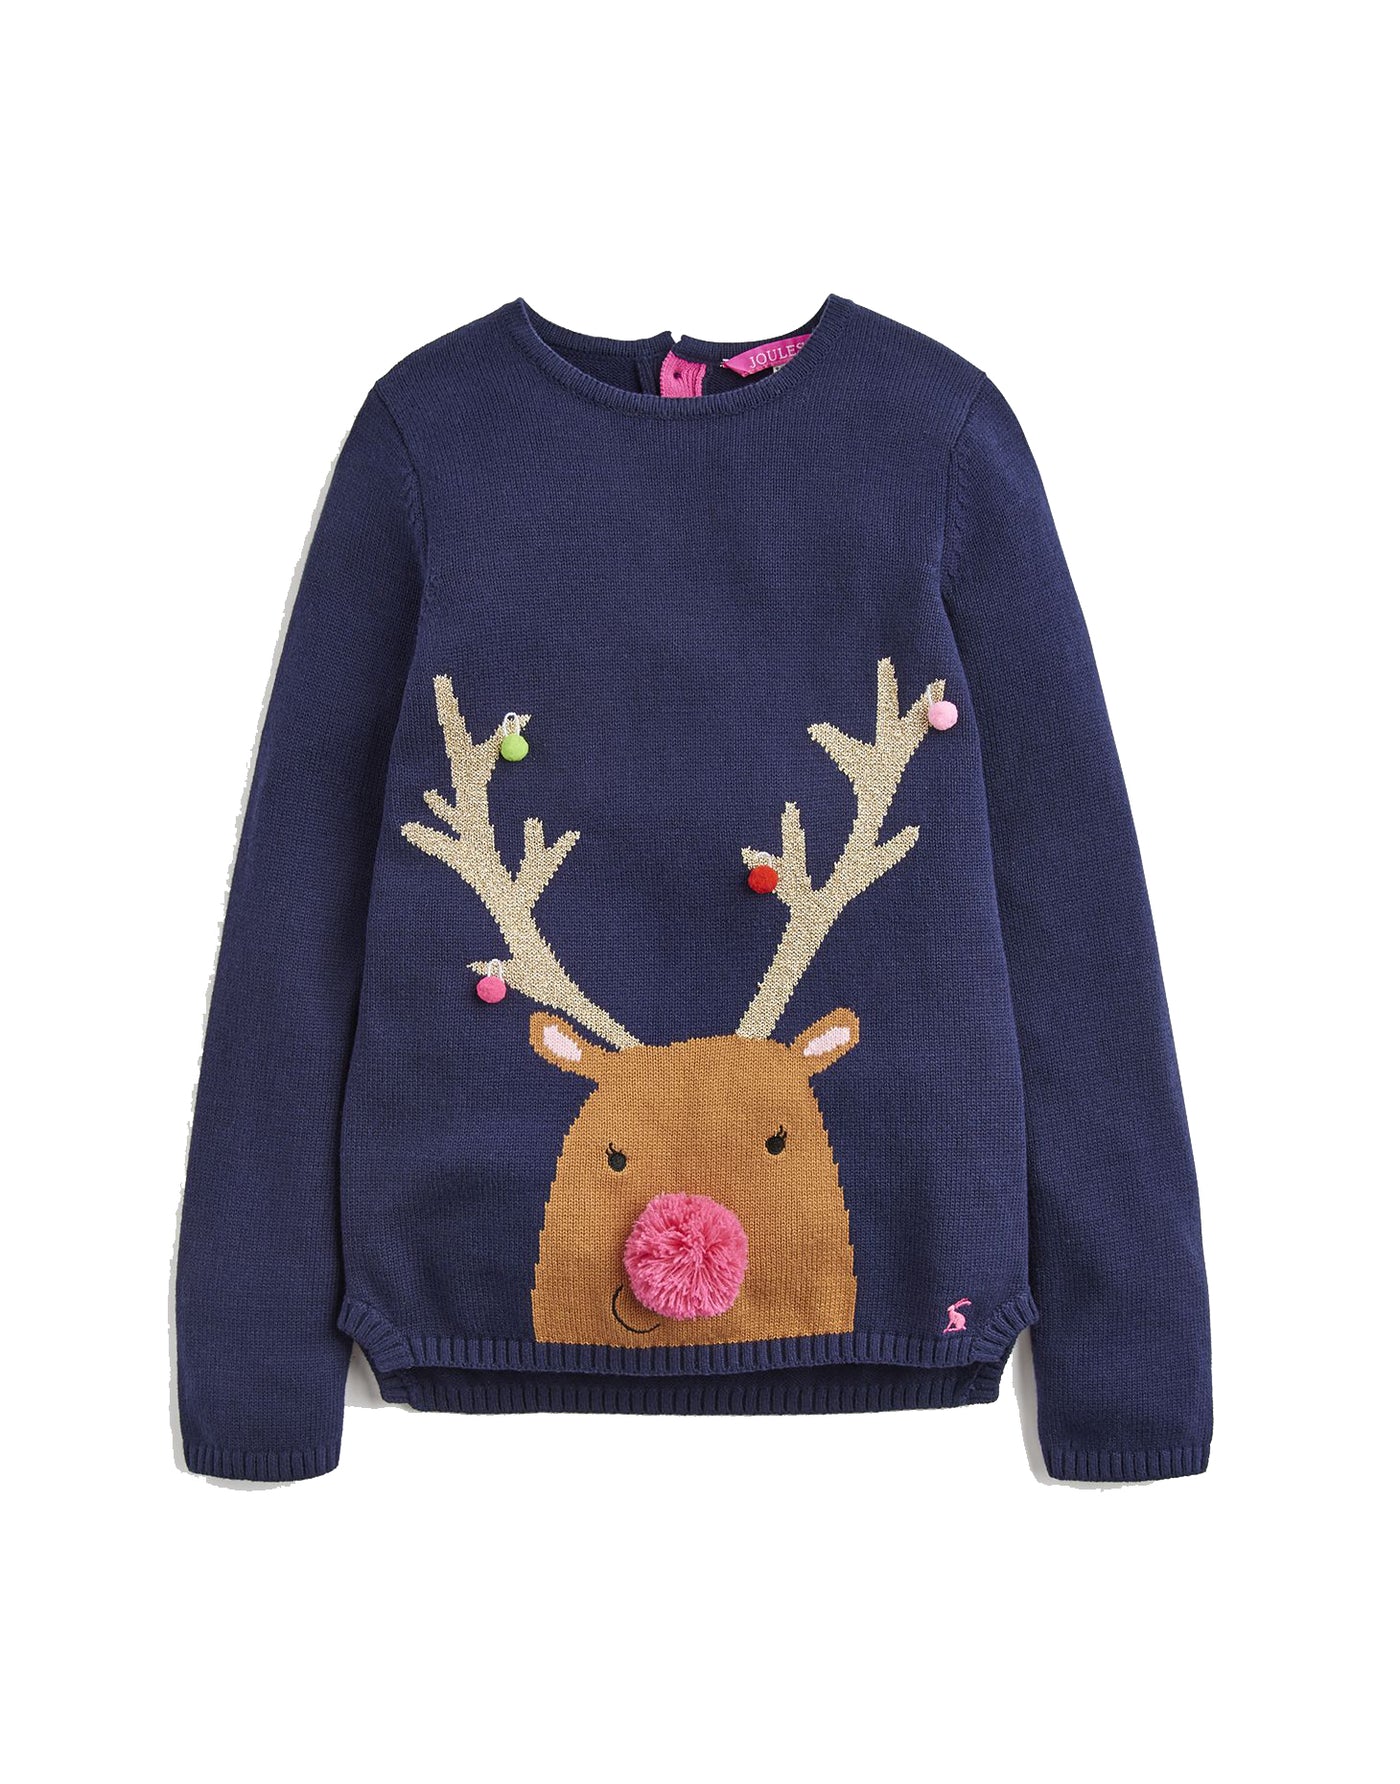 Joules Festive Artwork Sweater - French Navy